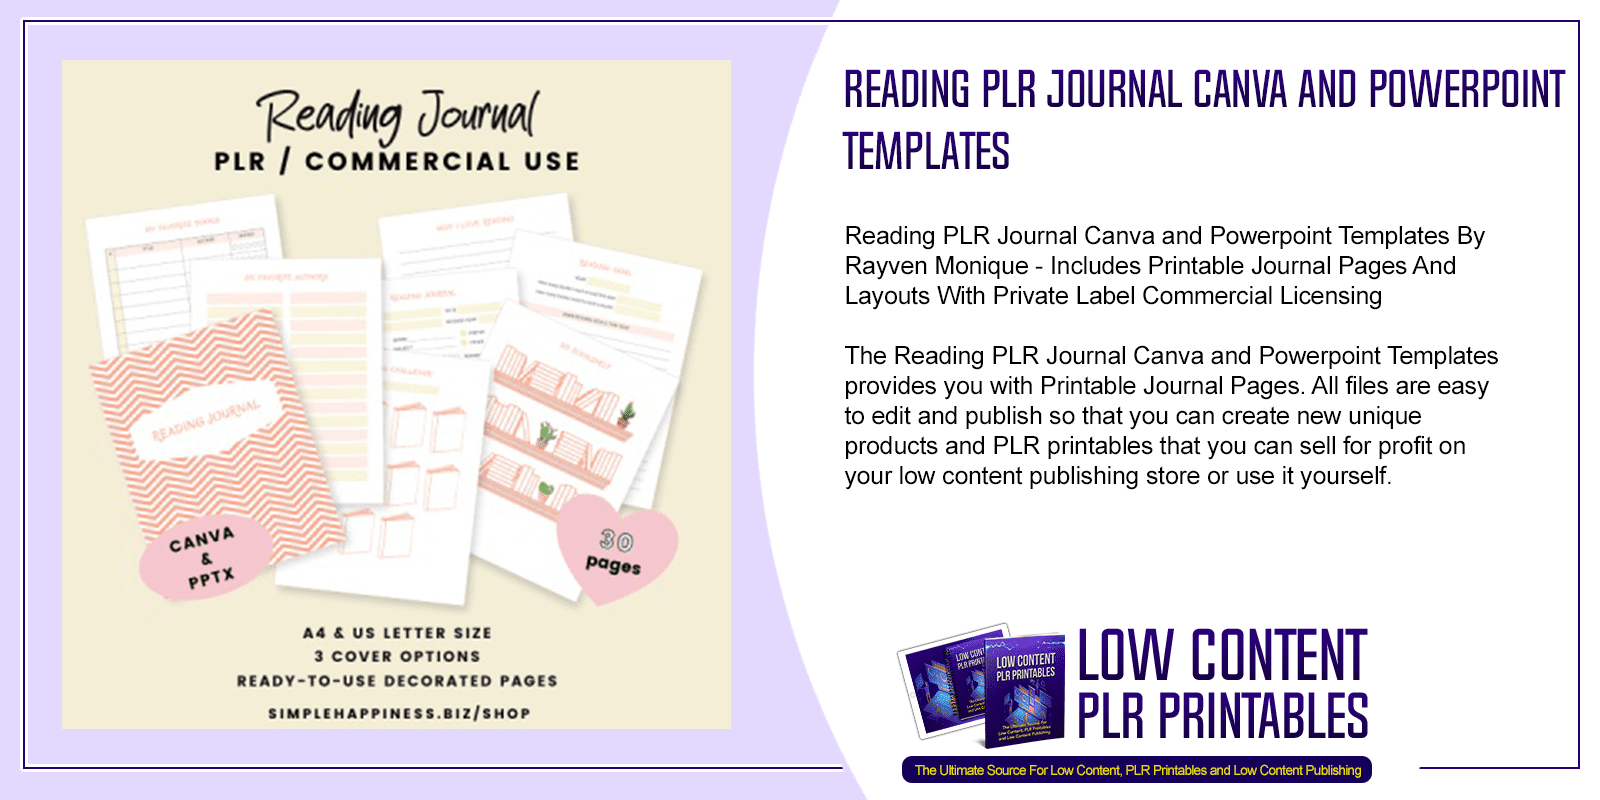 Reading PLR Journal Canva and Powerpoint Templates